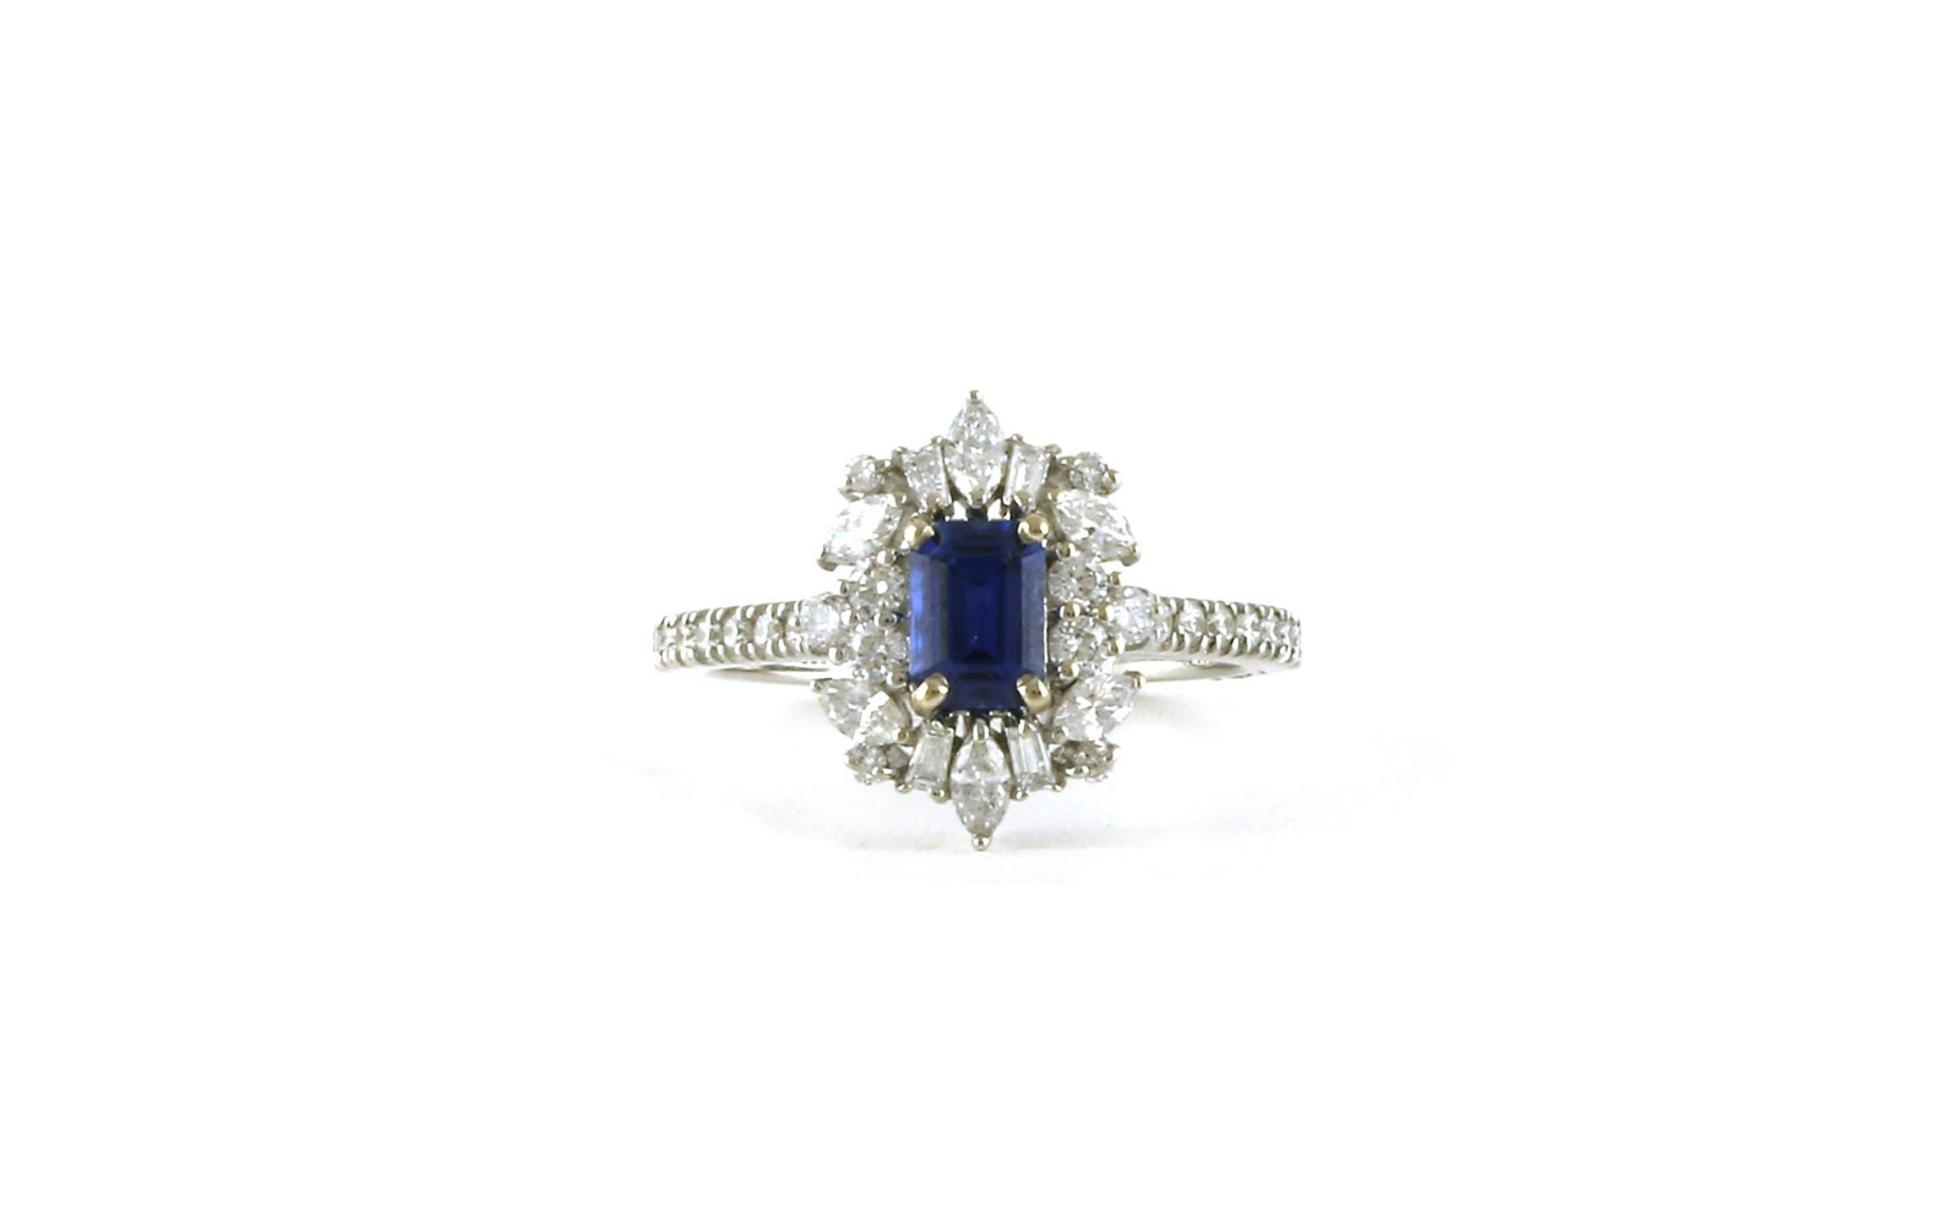 Montana Yogo Sapphire Ring with Cluster Diamond Halo in White Gold (1.16cts TWT)